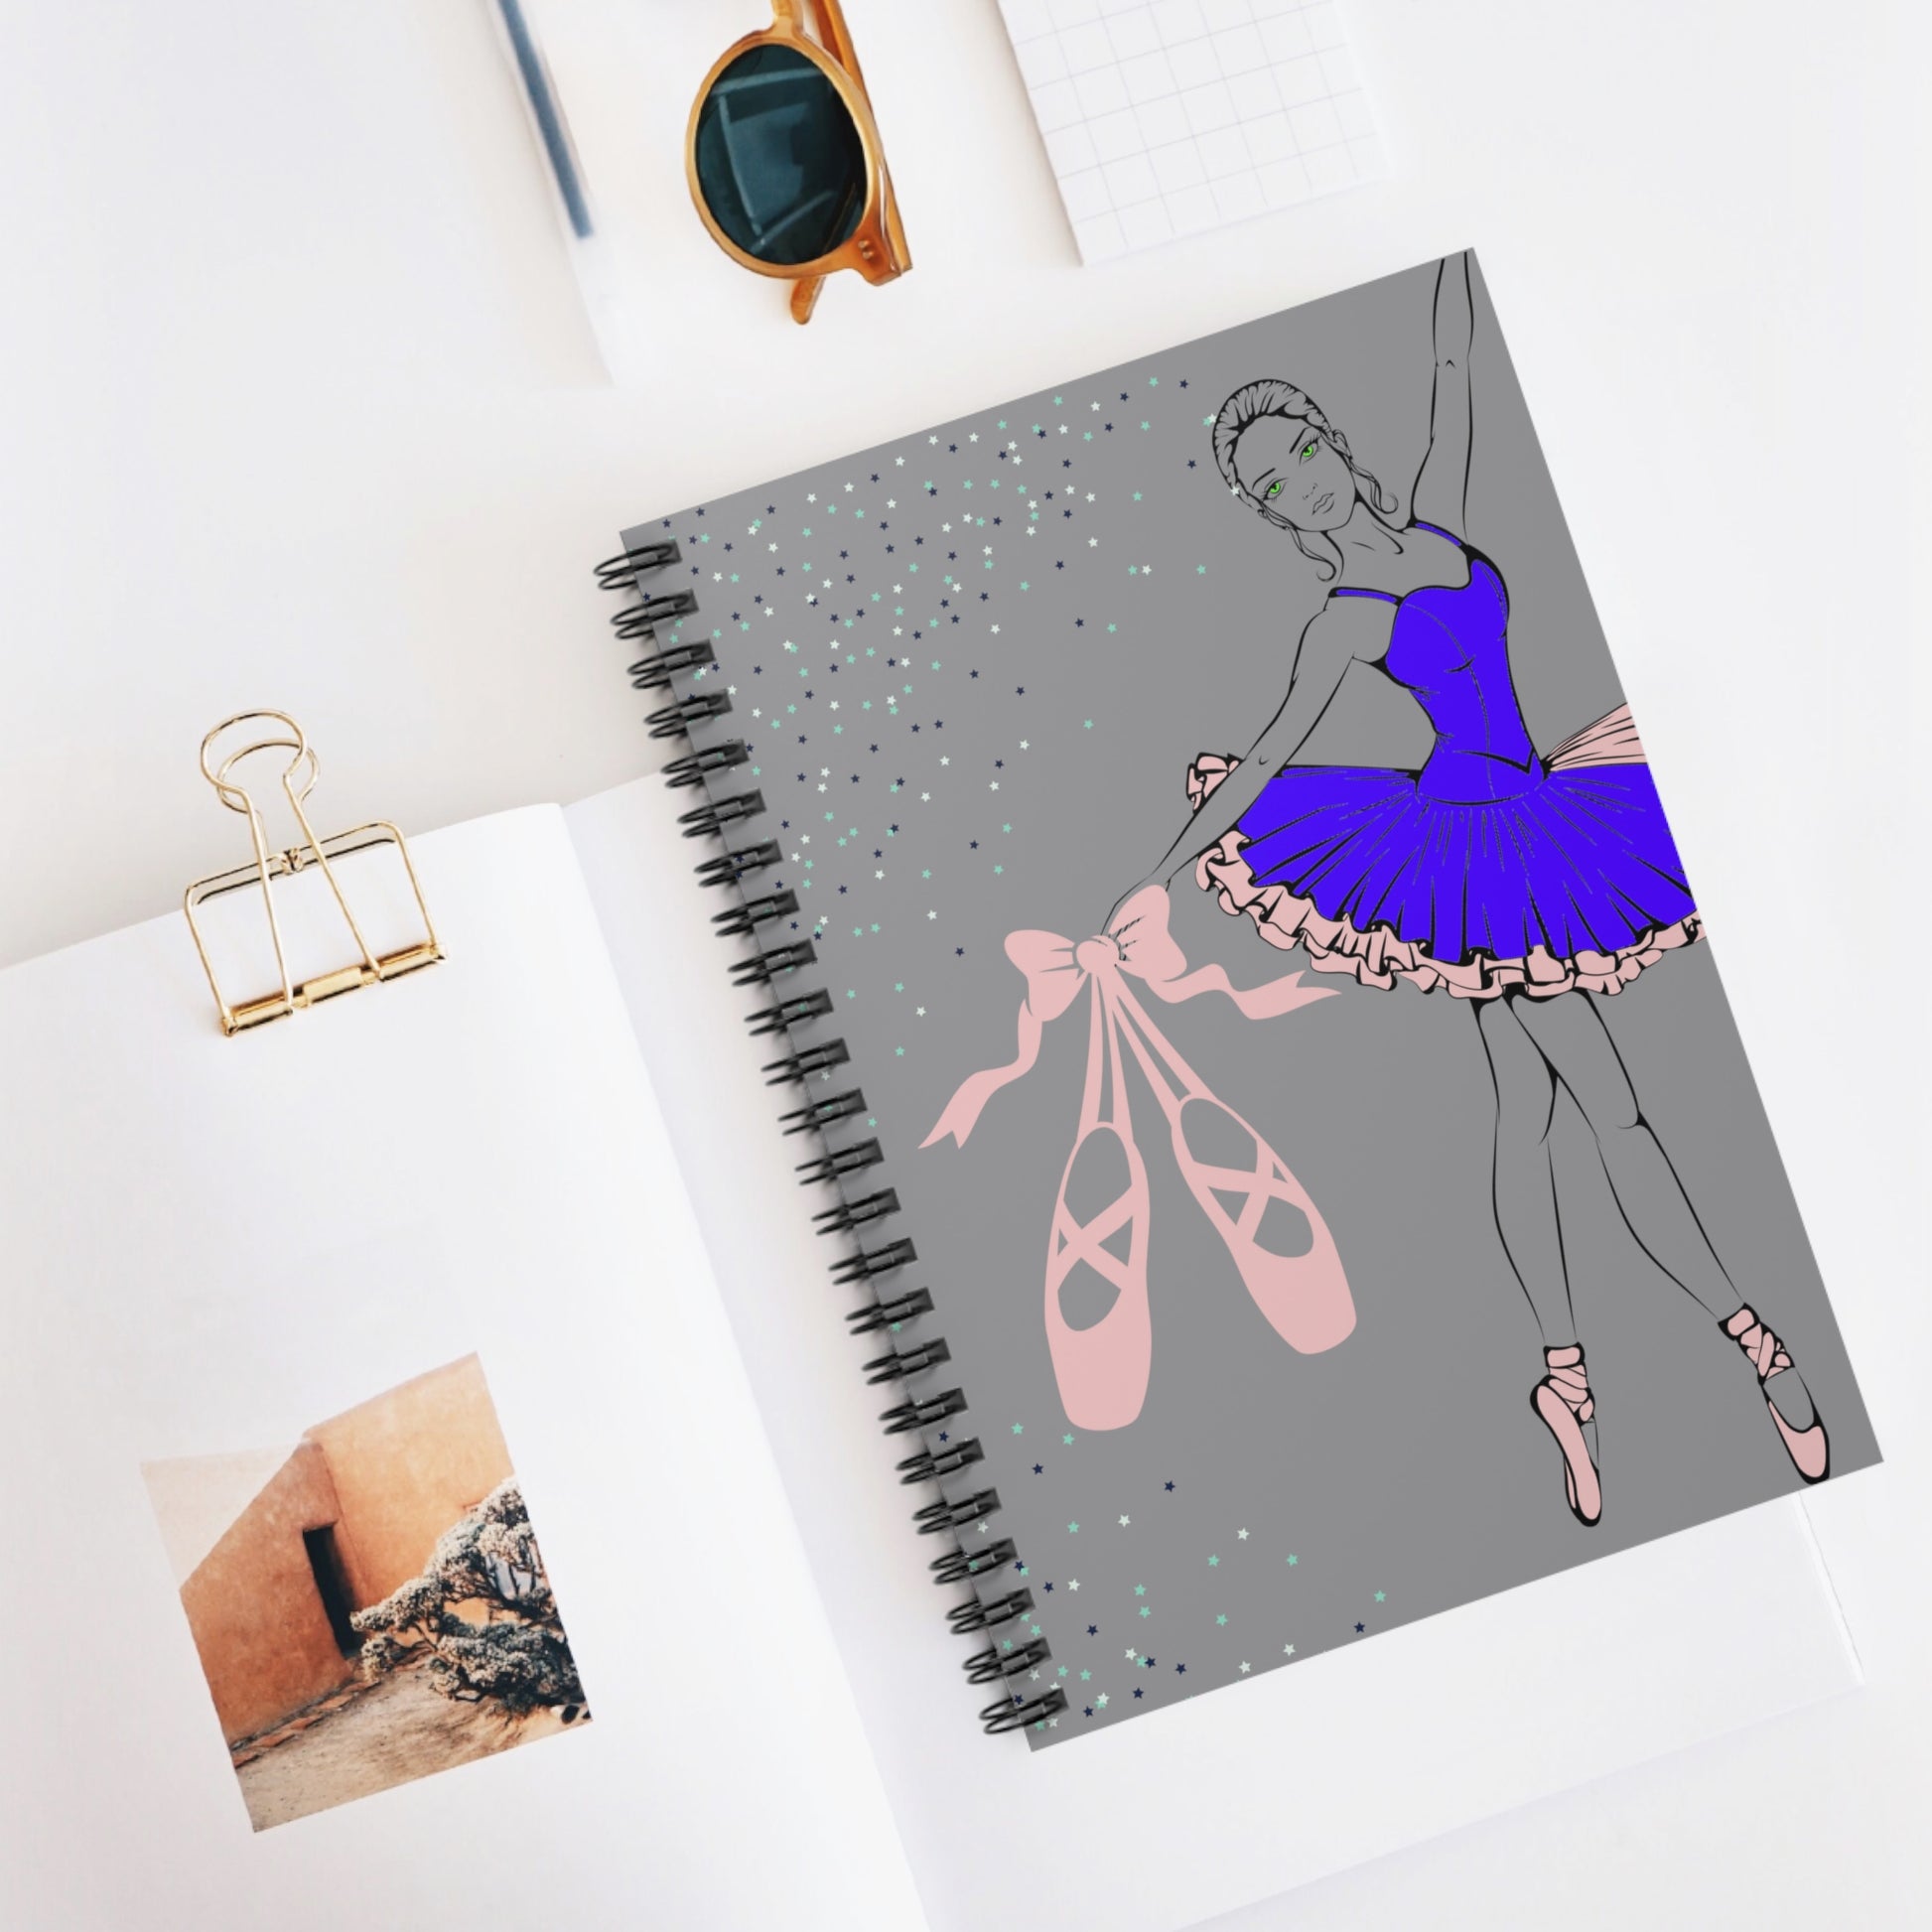 Dance Among the Stars: Spiral Notebook - Log Books - Journals - Diaries - and More Custom Printed by TheGlassyLass